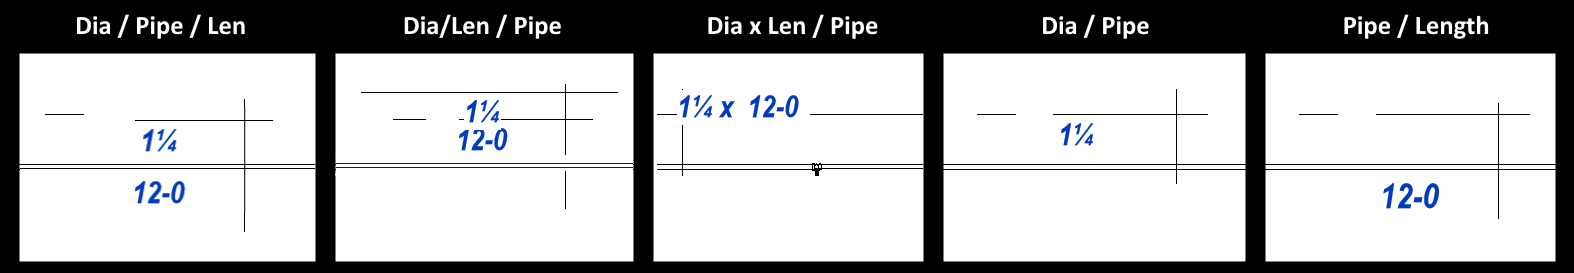 HCAD1 Pipe Size Text Tags